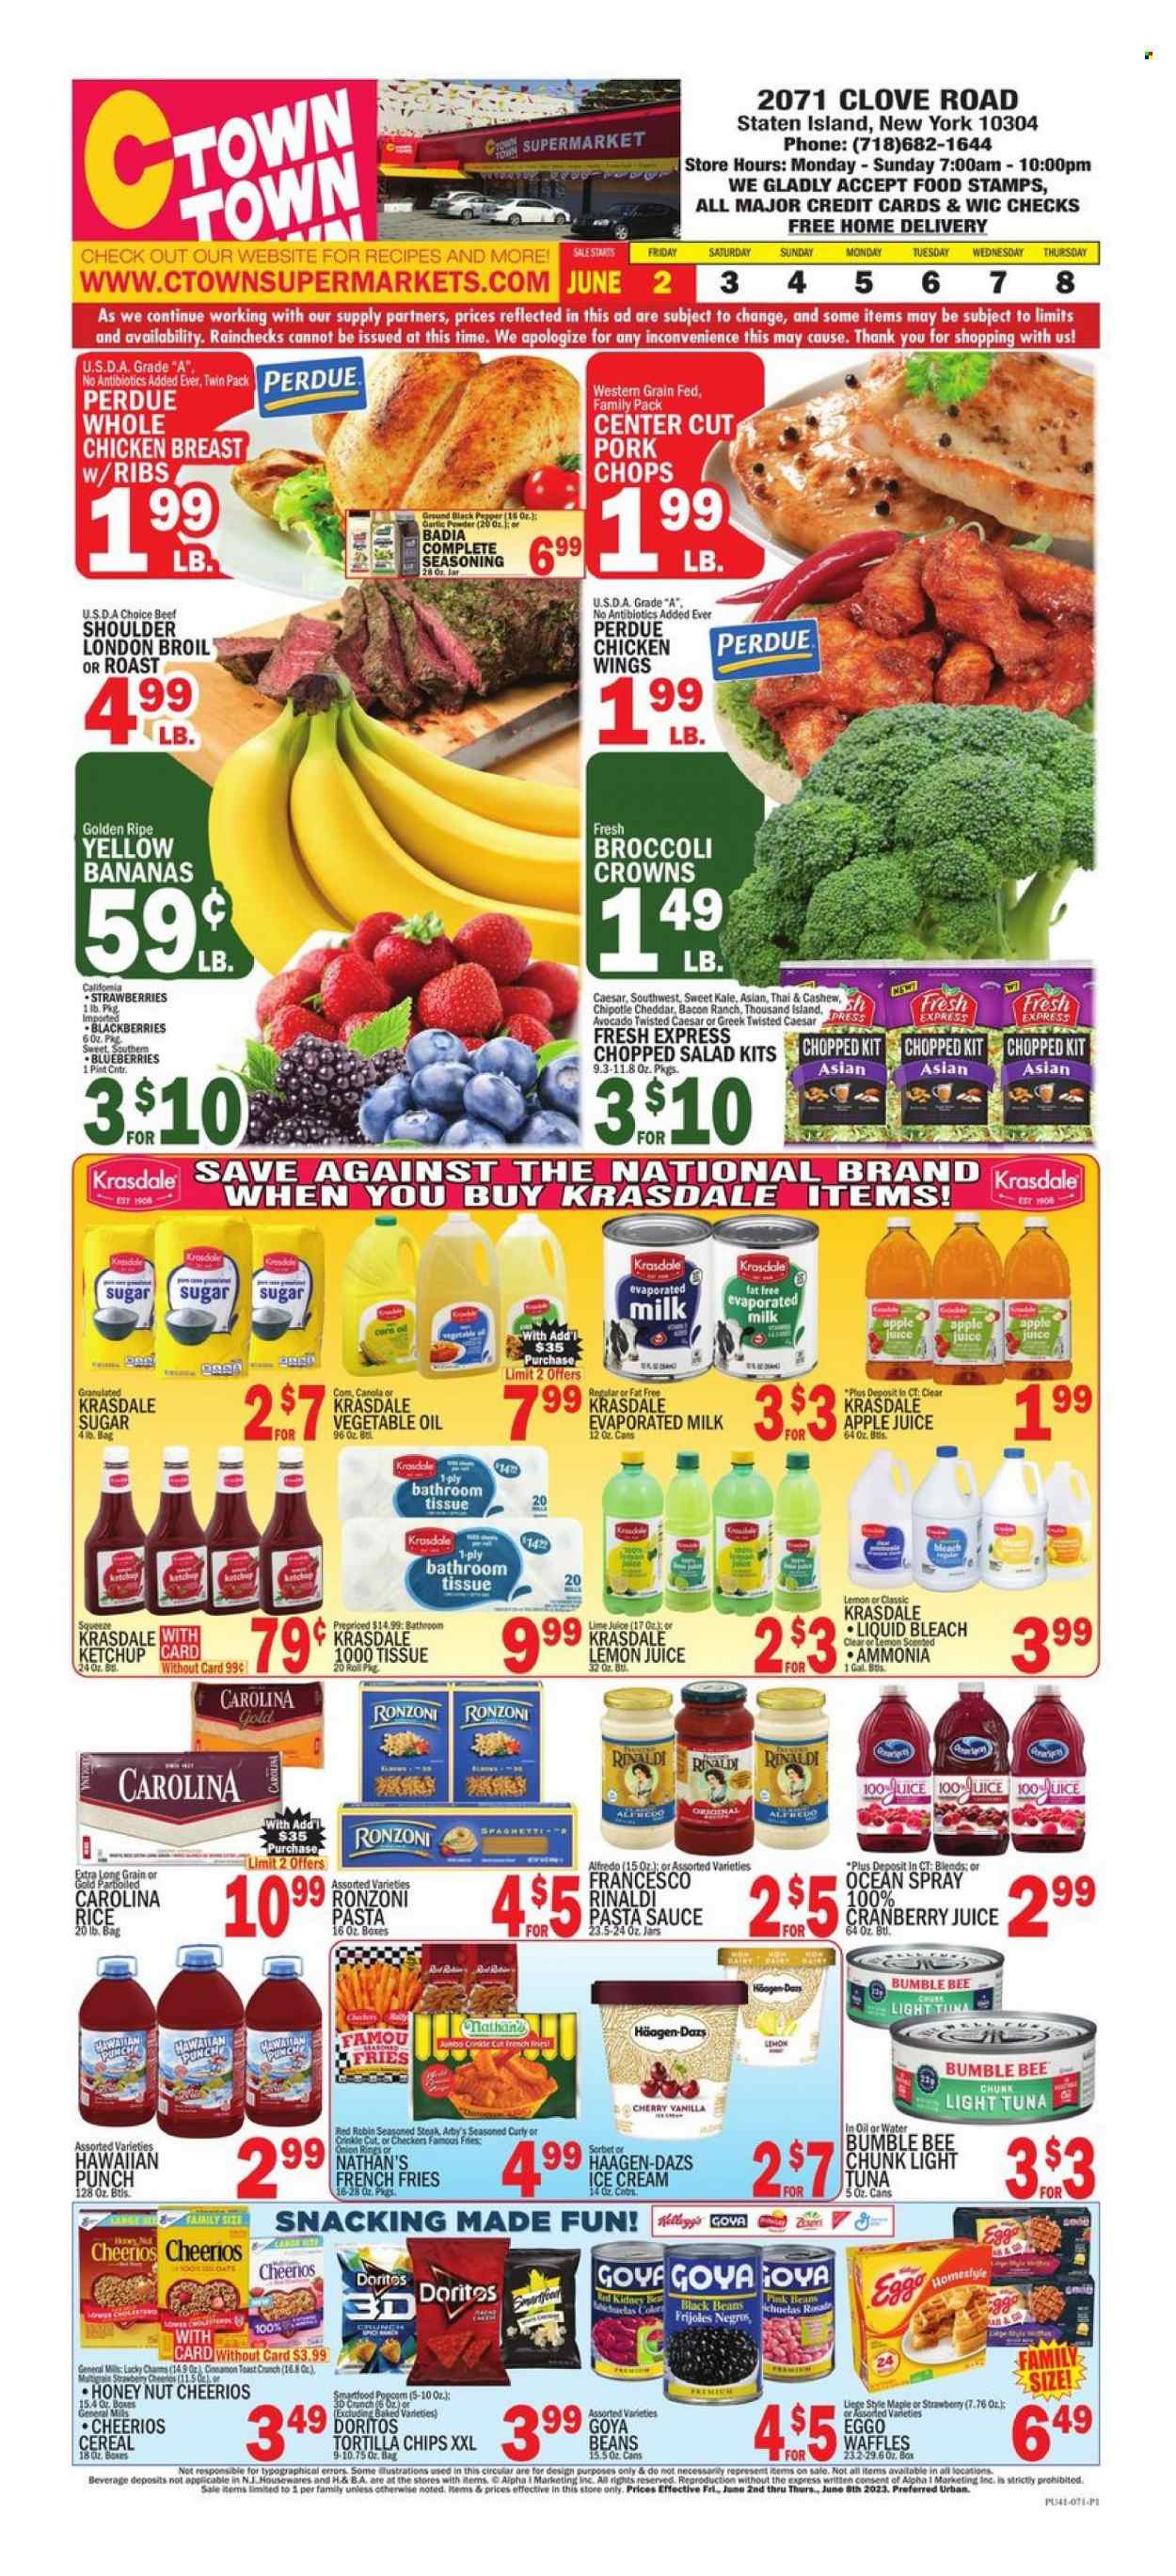 thumbnail - C-Town Flyer - 06/02/2023 - 06/08/2023 - Sales products - waffles, beans, kale, salad, chopped salad, avocado, blackberries, cherries, tuna, spaghetti, pasta sauce, onion rings, Bumble Bee, sauce, Perdue®, roast, ready meal, bacon, cheese, evaporated milk, Thousand Island dressing, ice cream, Häagen-Dazs, sorbet, potato fries, french fries, General Mills, Doritos, tortilla chips, chips, Smartfood, salty snack, sugar, black beans, light tuna, Goya, Badia, cereals, Cheerios, rice, parboiled rice, cloves, spice, garlic powder, cinnamon, ketchup, corn oil, vegetable oil, apple juice, cranberry juice, water, lemon juice, whole chicken, chicken breasts, steak, ribs, pork chops, pork meat. Page 1.